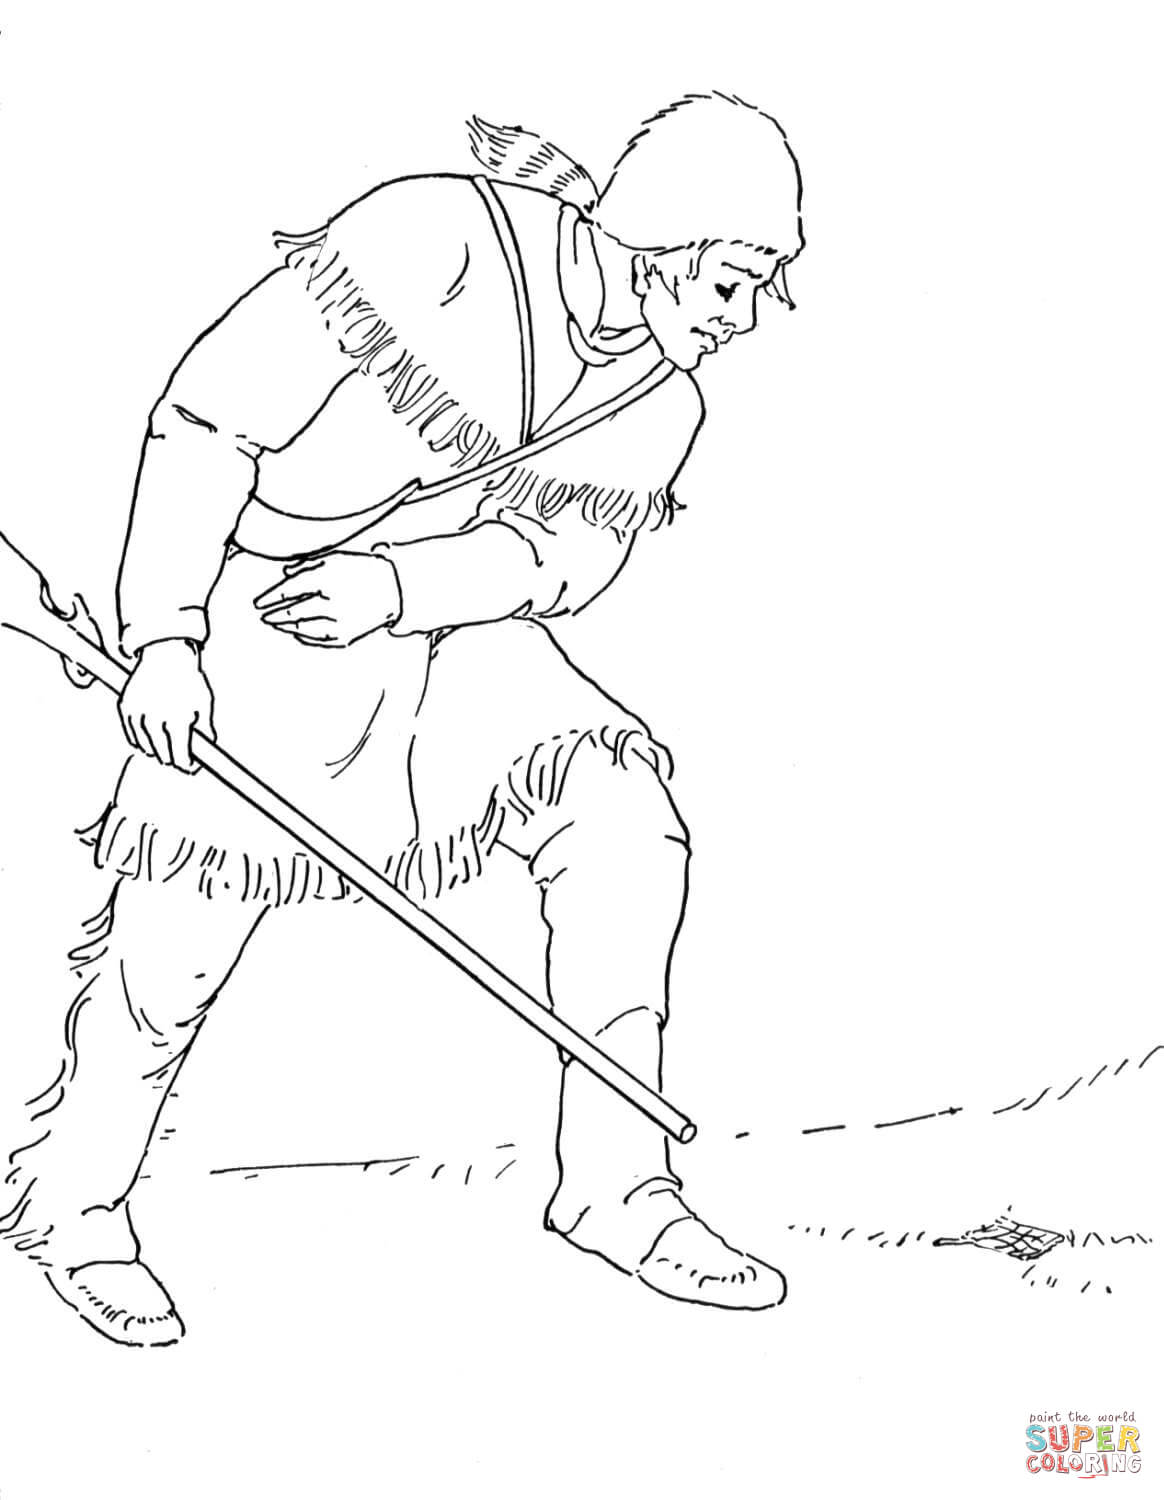 Daniel Boone Speaks to Indians coloring page | Free Printable ...